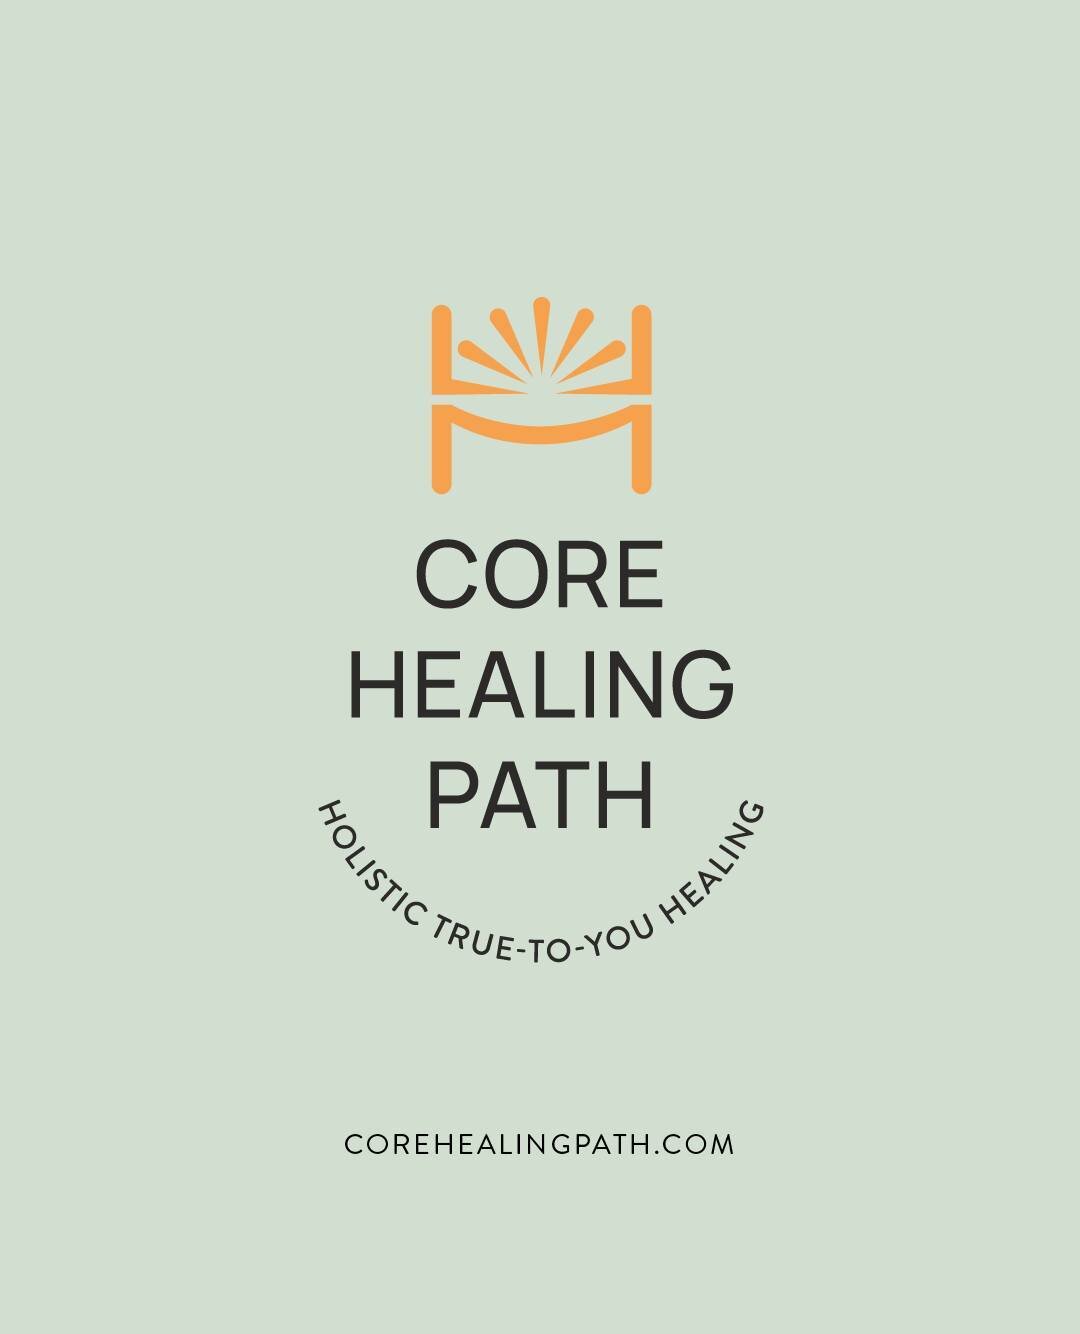 At Core Healing Path, we will help you transform your life through a natural and gentle healing journey that breaks you free of physical and mental suffering, allowing you to reconnect with your life&rsquo;s purpose.⁠
⁠
Take the first step toward tru